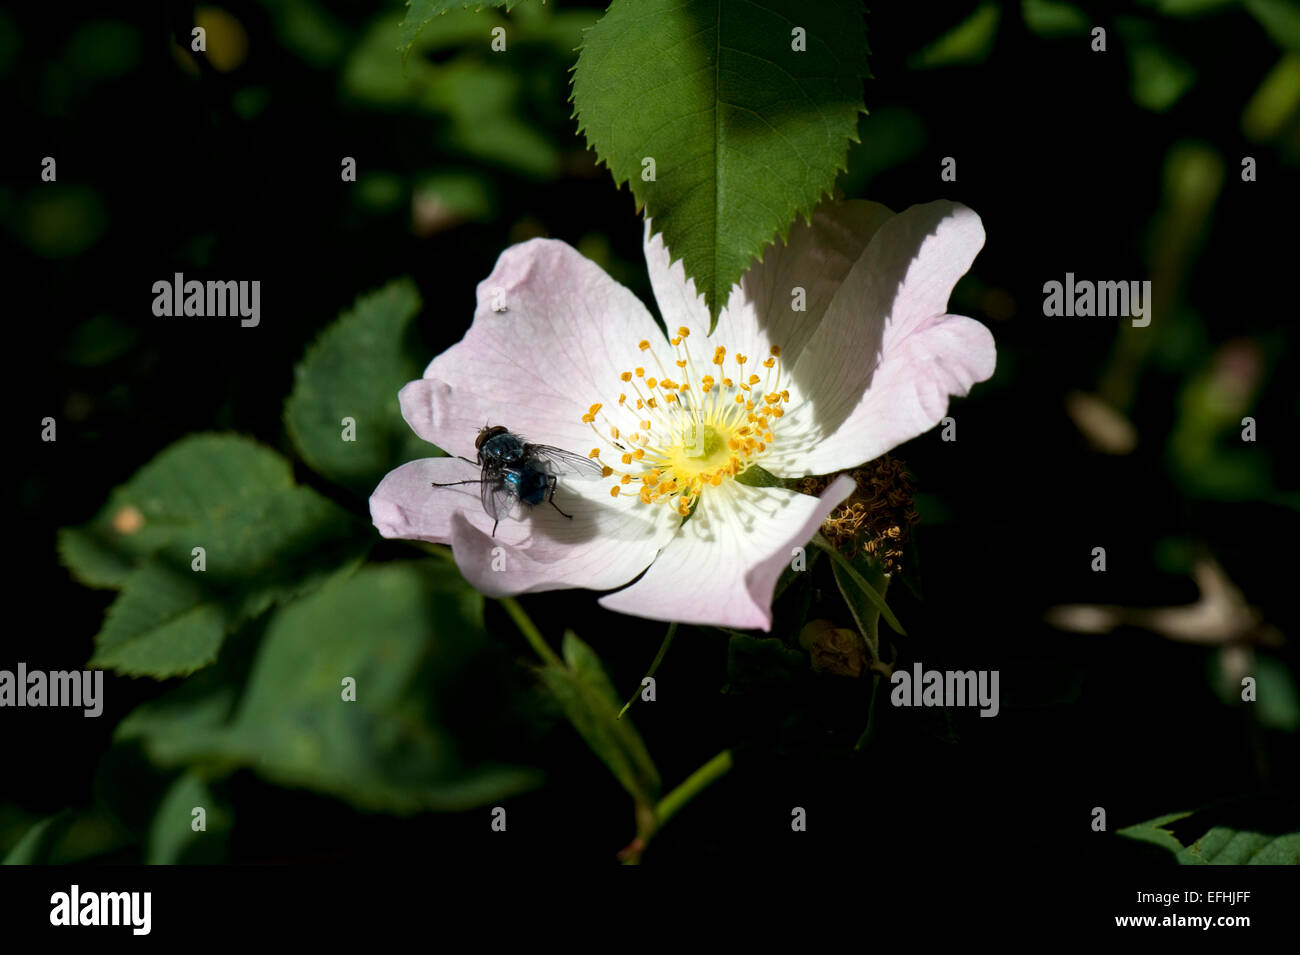 Flower of a dog rose, Rosa canina, with a fly resting on the pink petals in sunshire Stock Photo